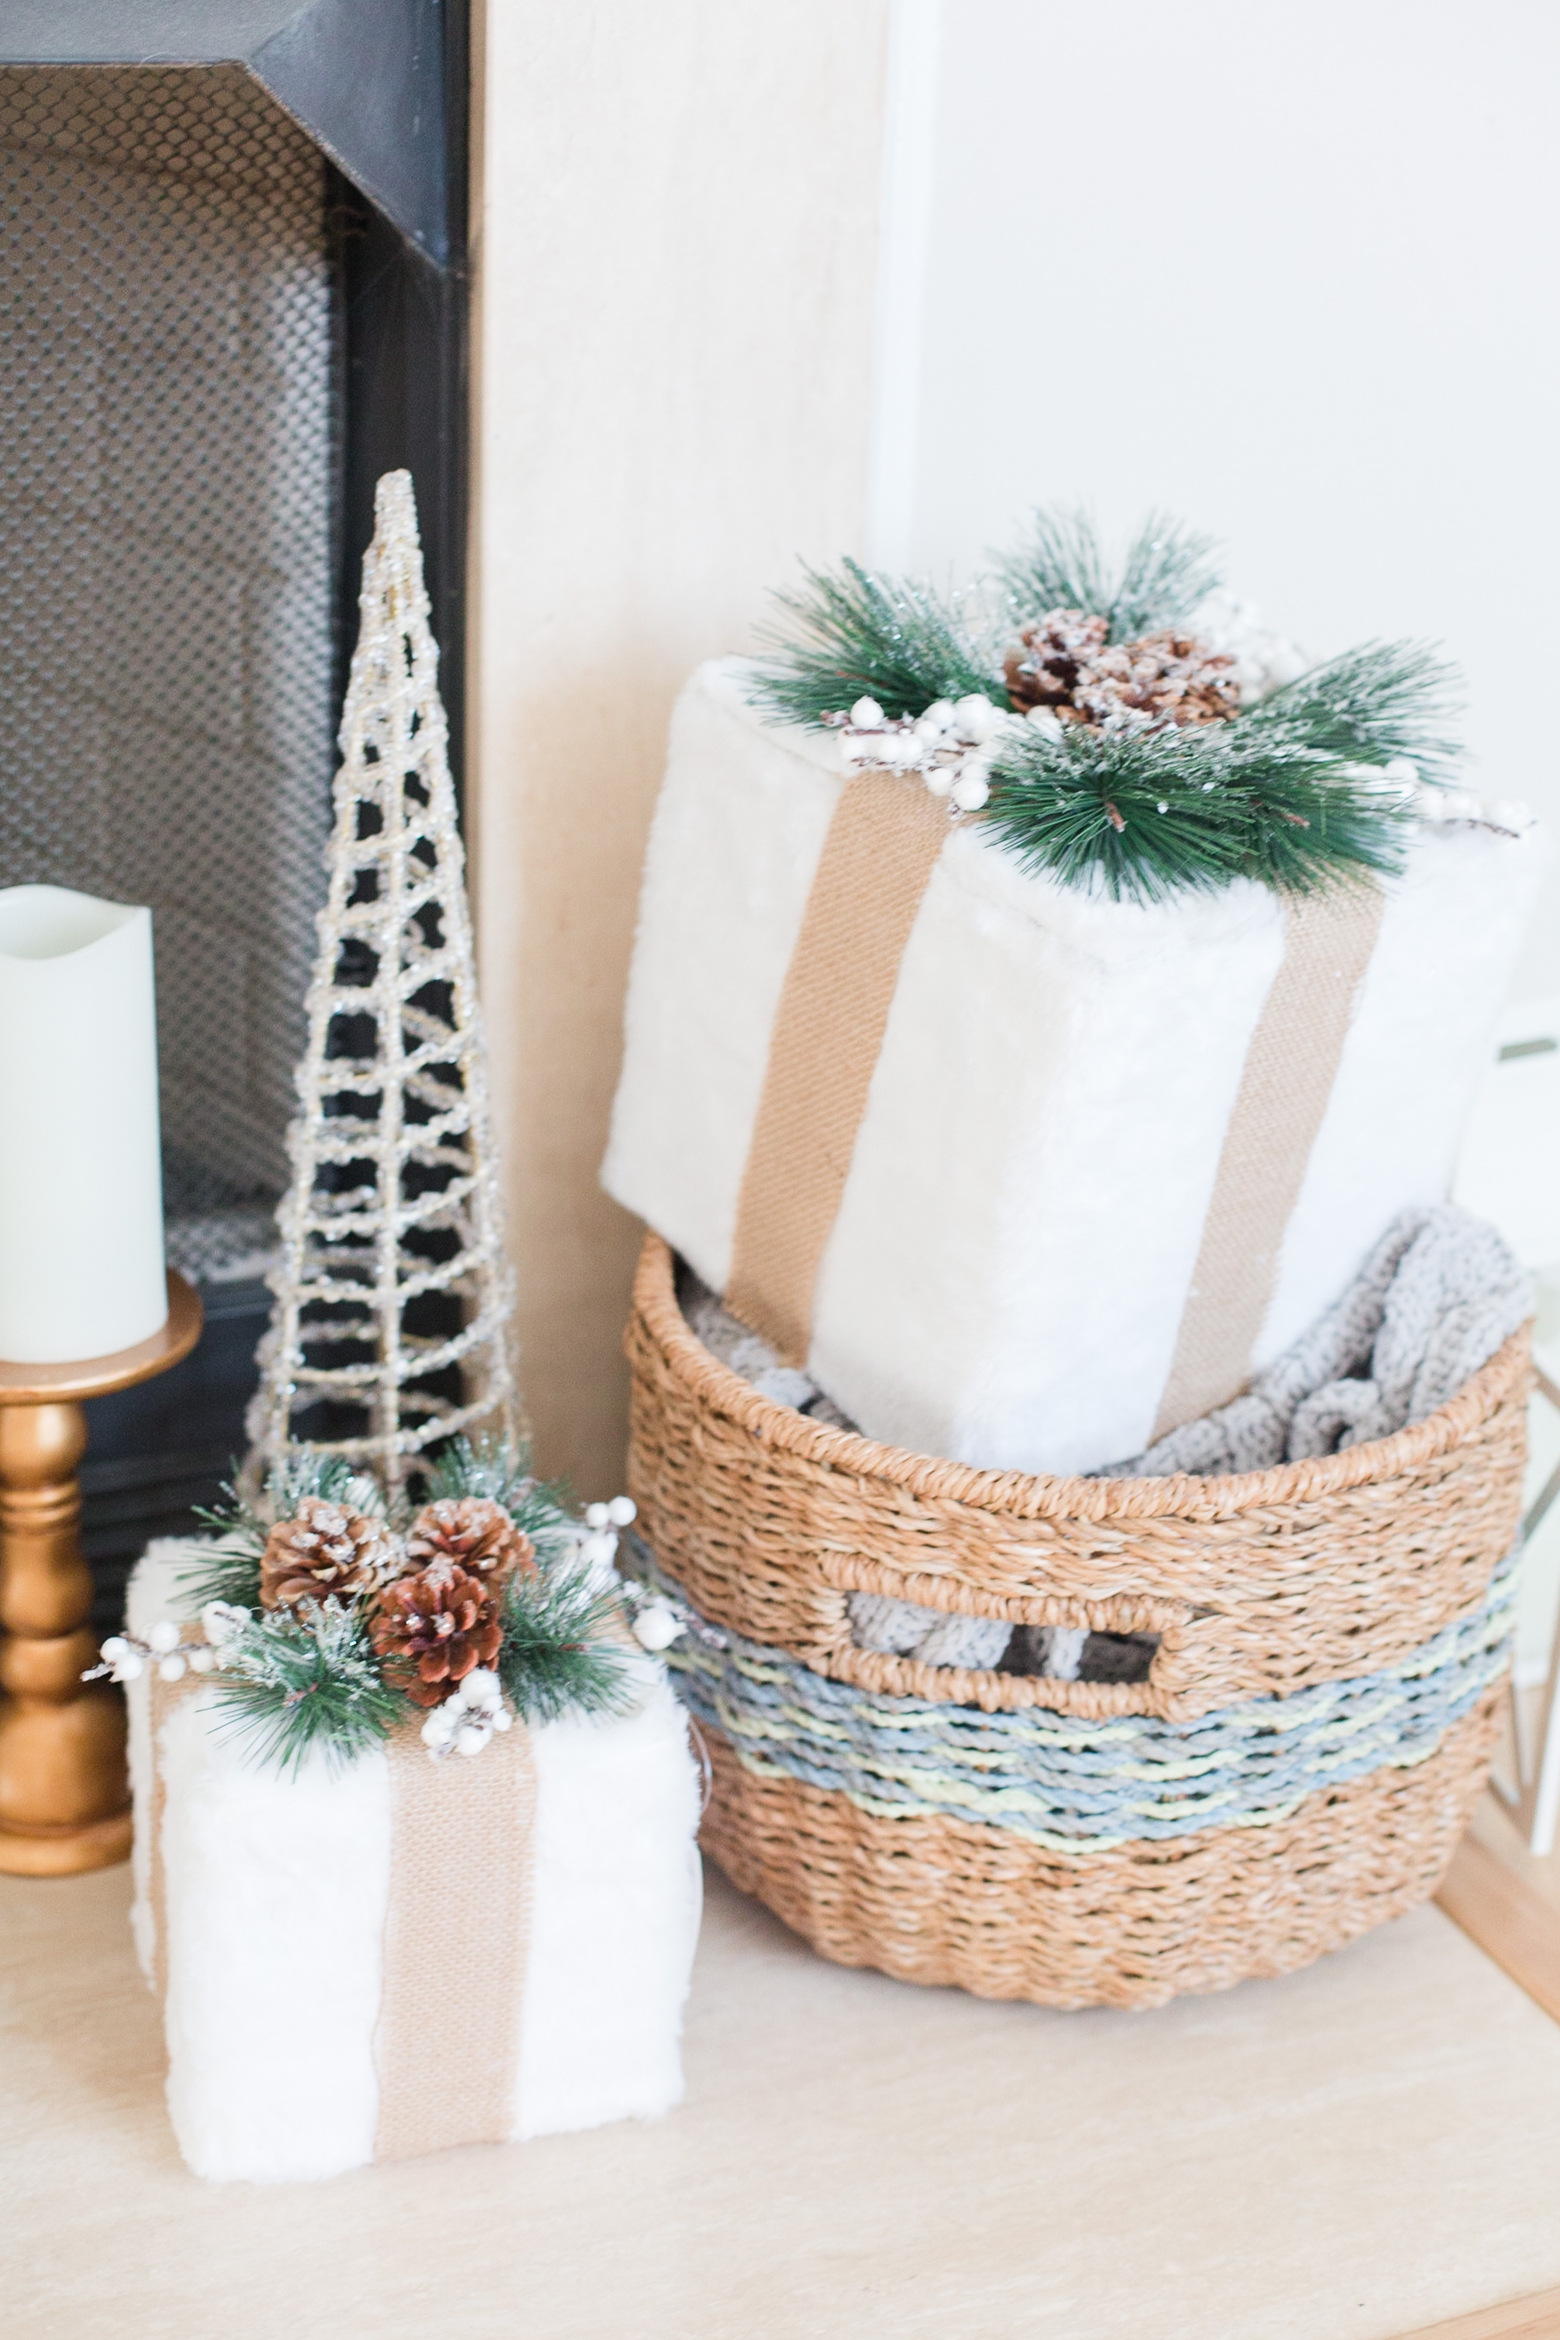 Bright and Airy Christmas Decor. Neutral colors with pops of green and gold!